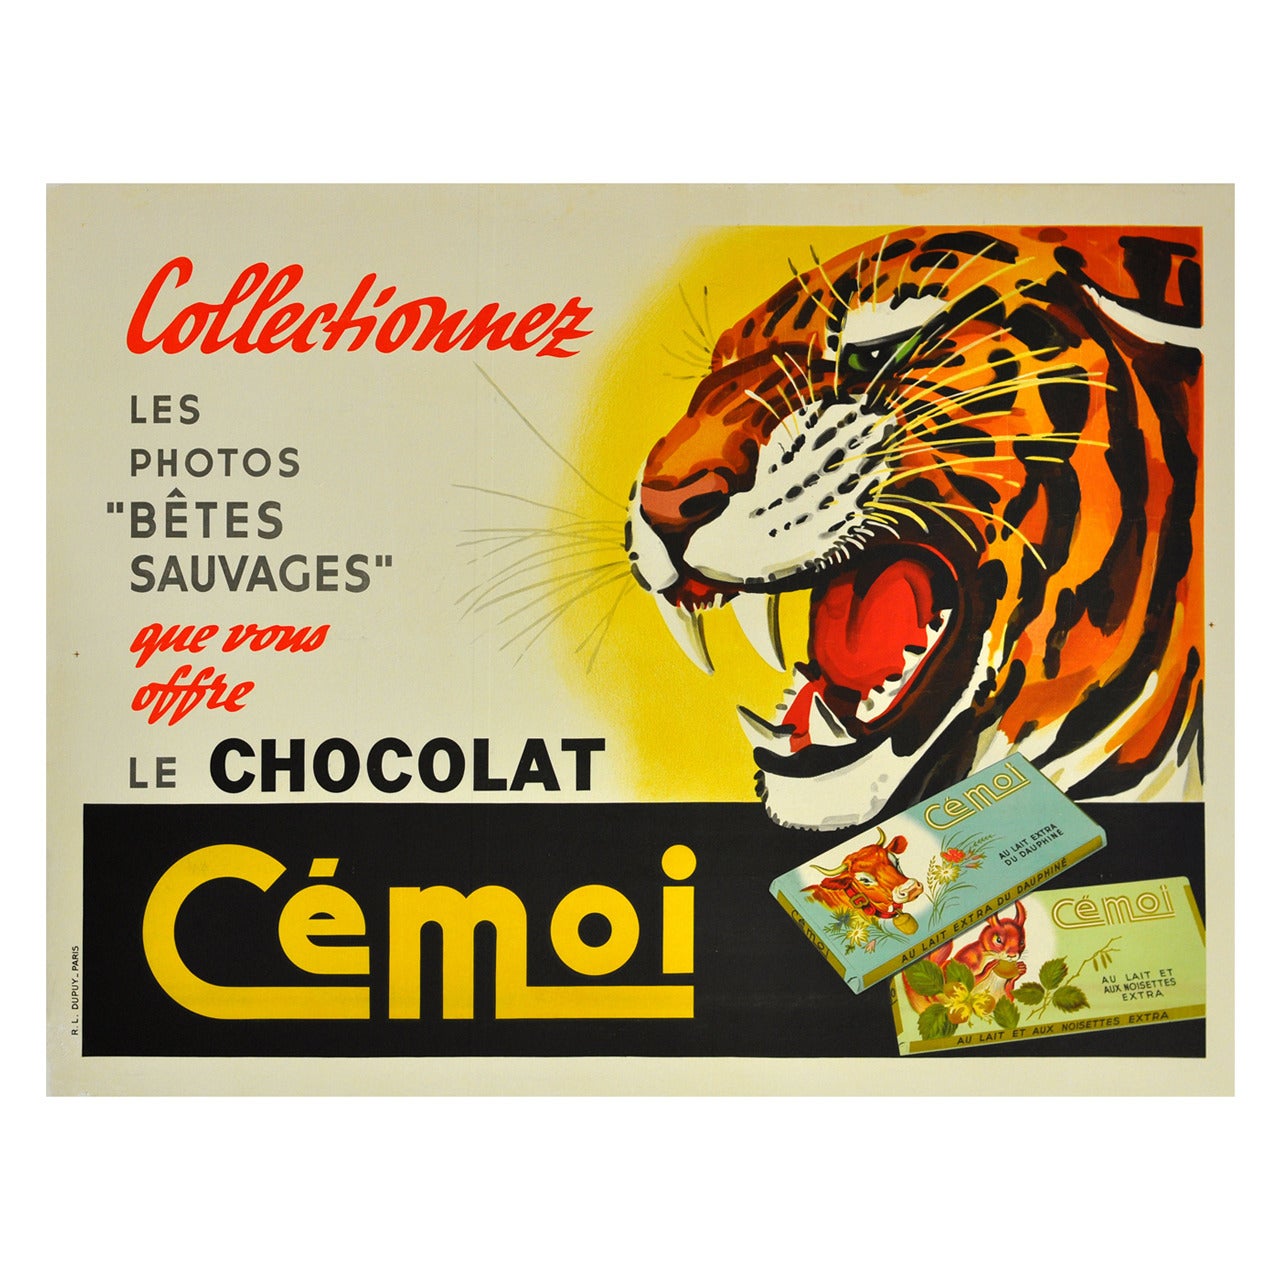 Original Vintage Advertising Poster for French Chocolate Cemoi, Featuring a Roaring Tiger